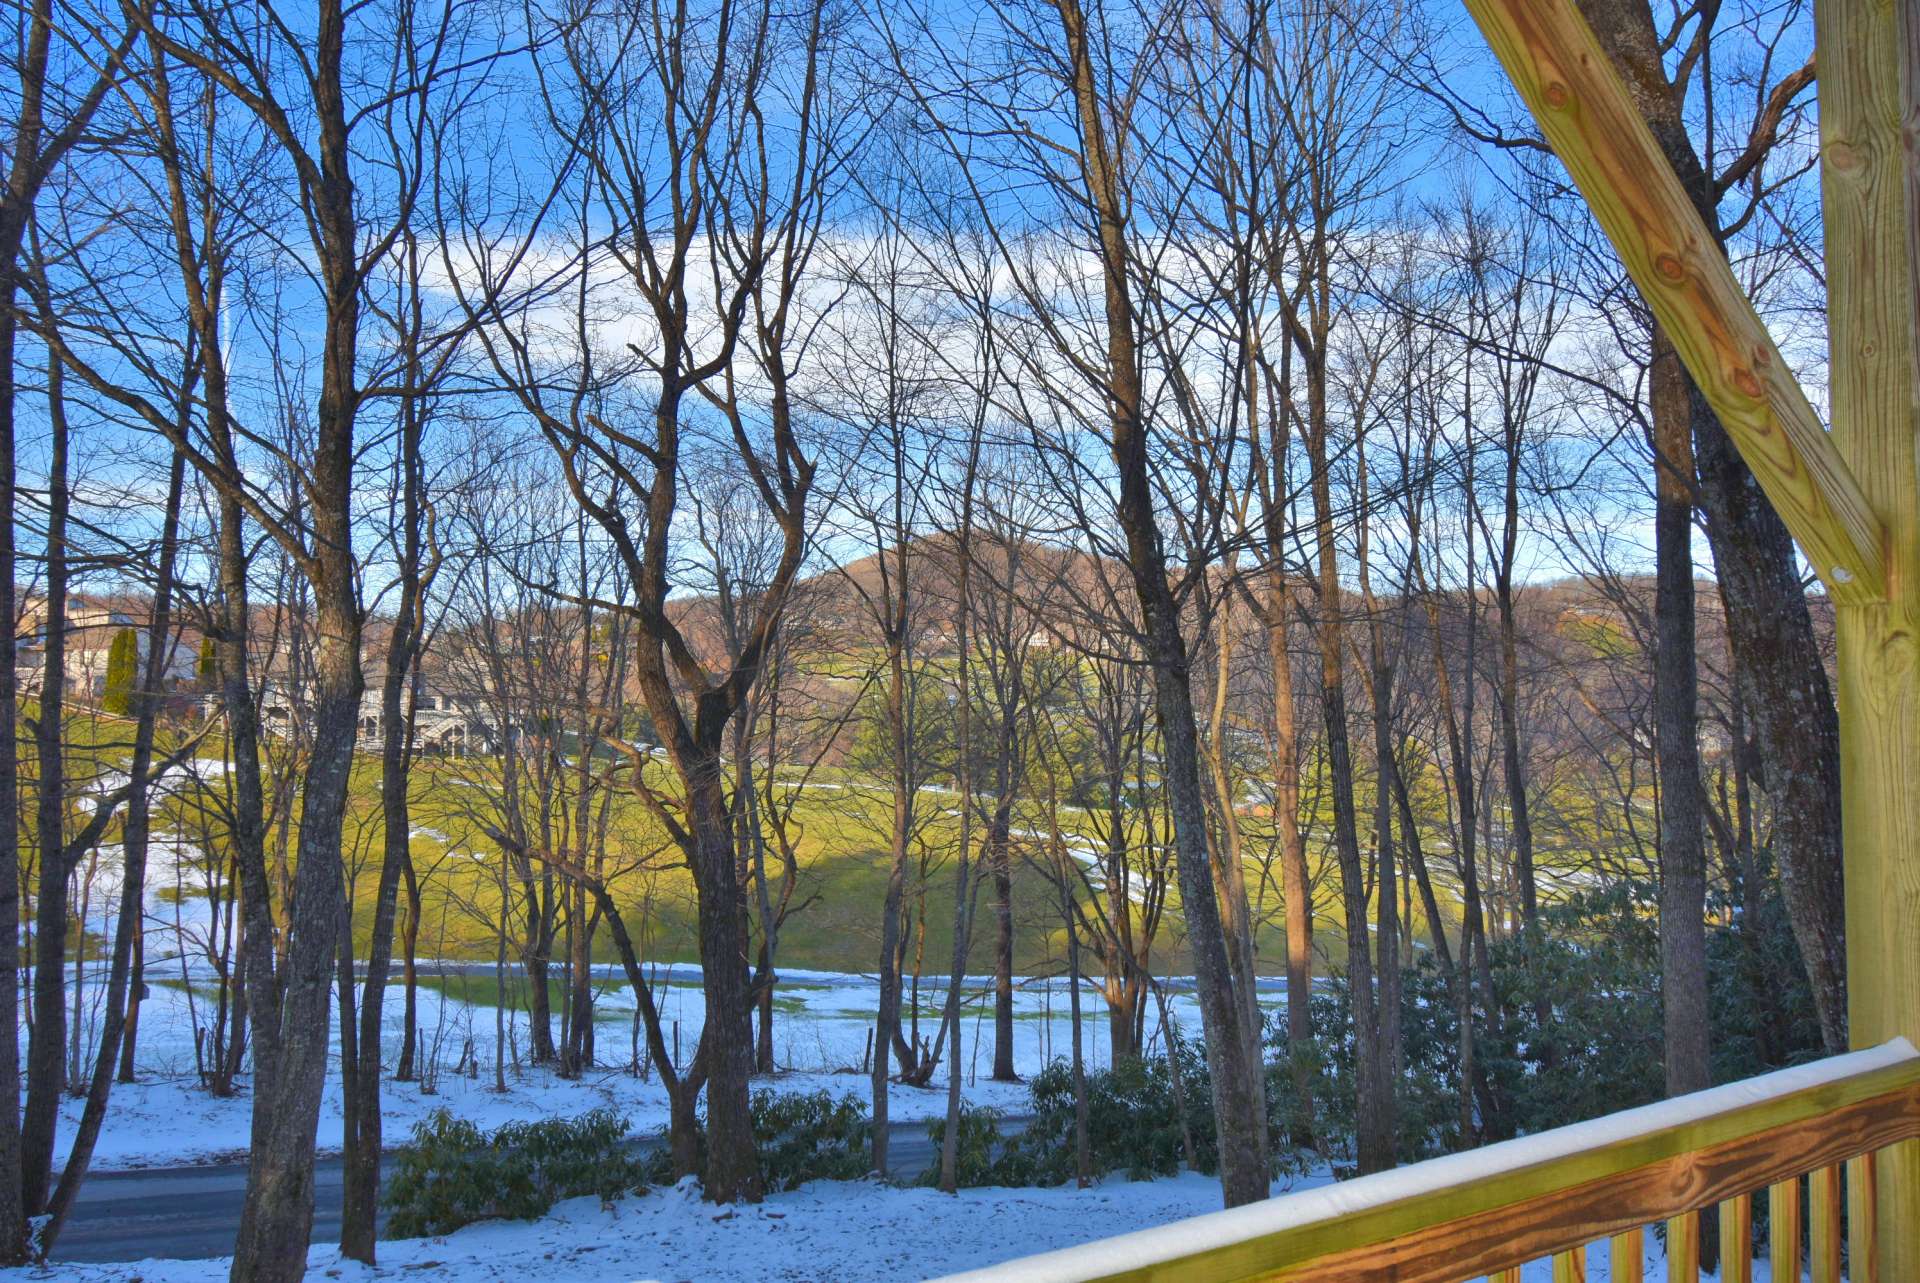 Overnight guests will enjoy seasonal views of Mountain Aire Golf Course from the lower level deck.